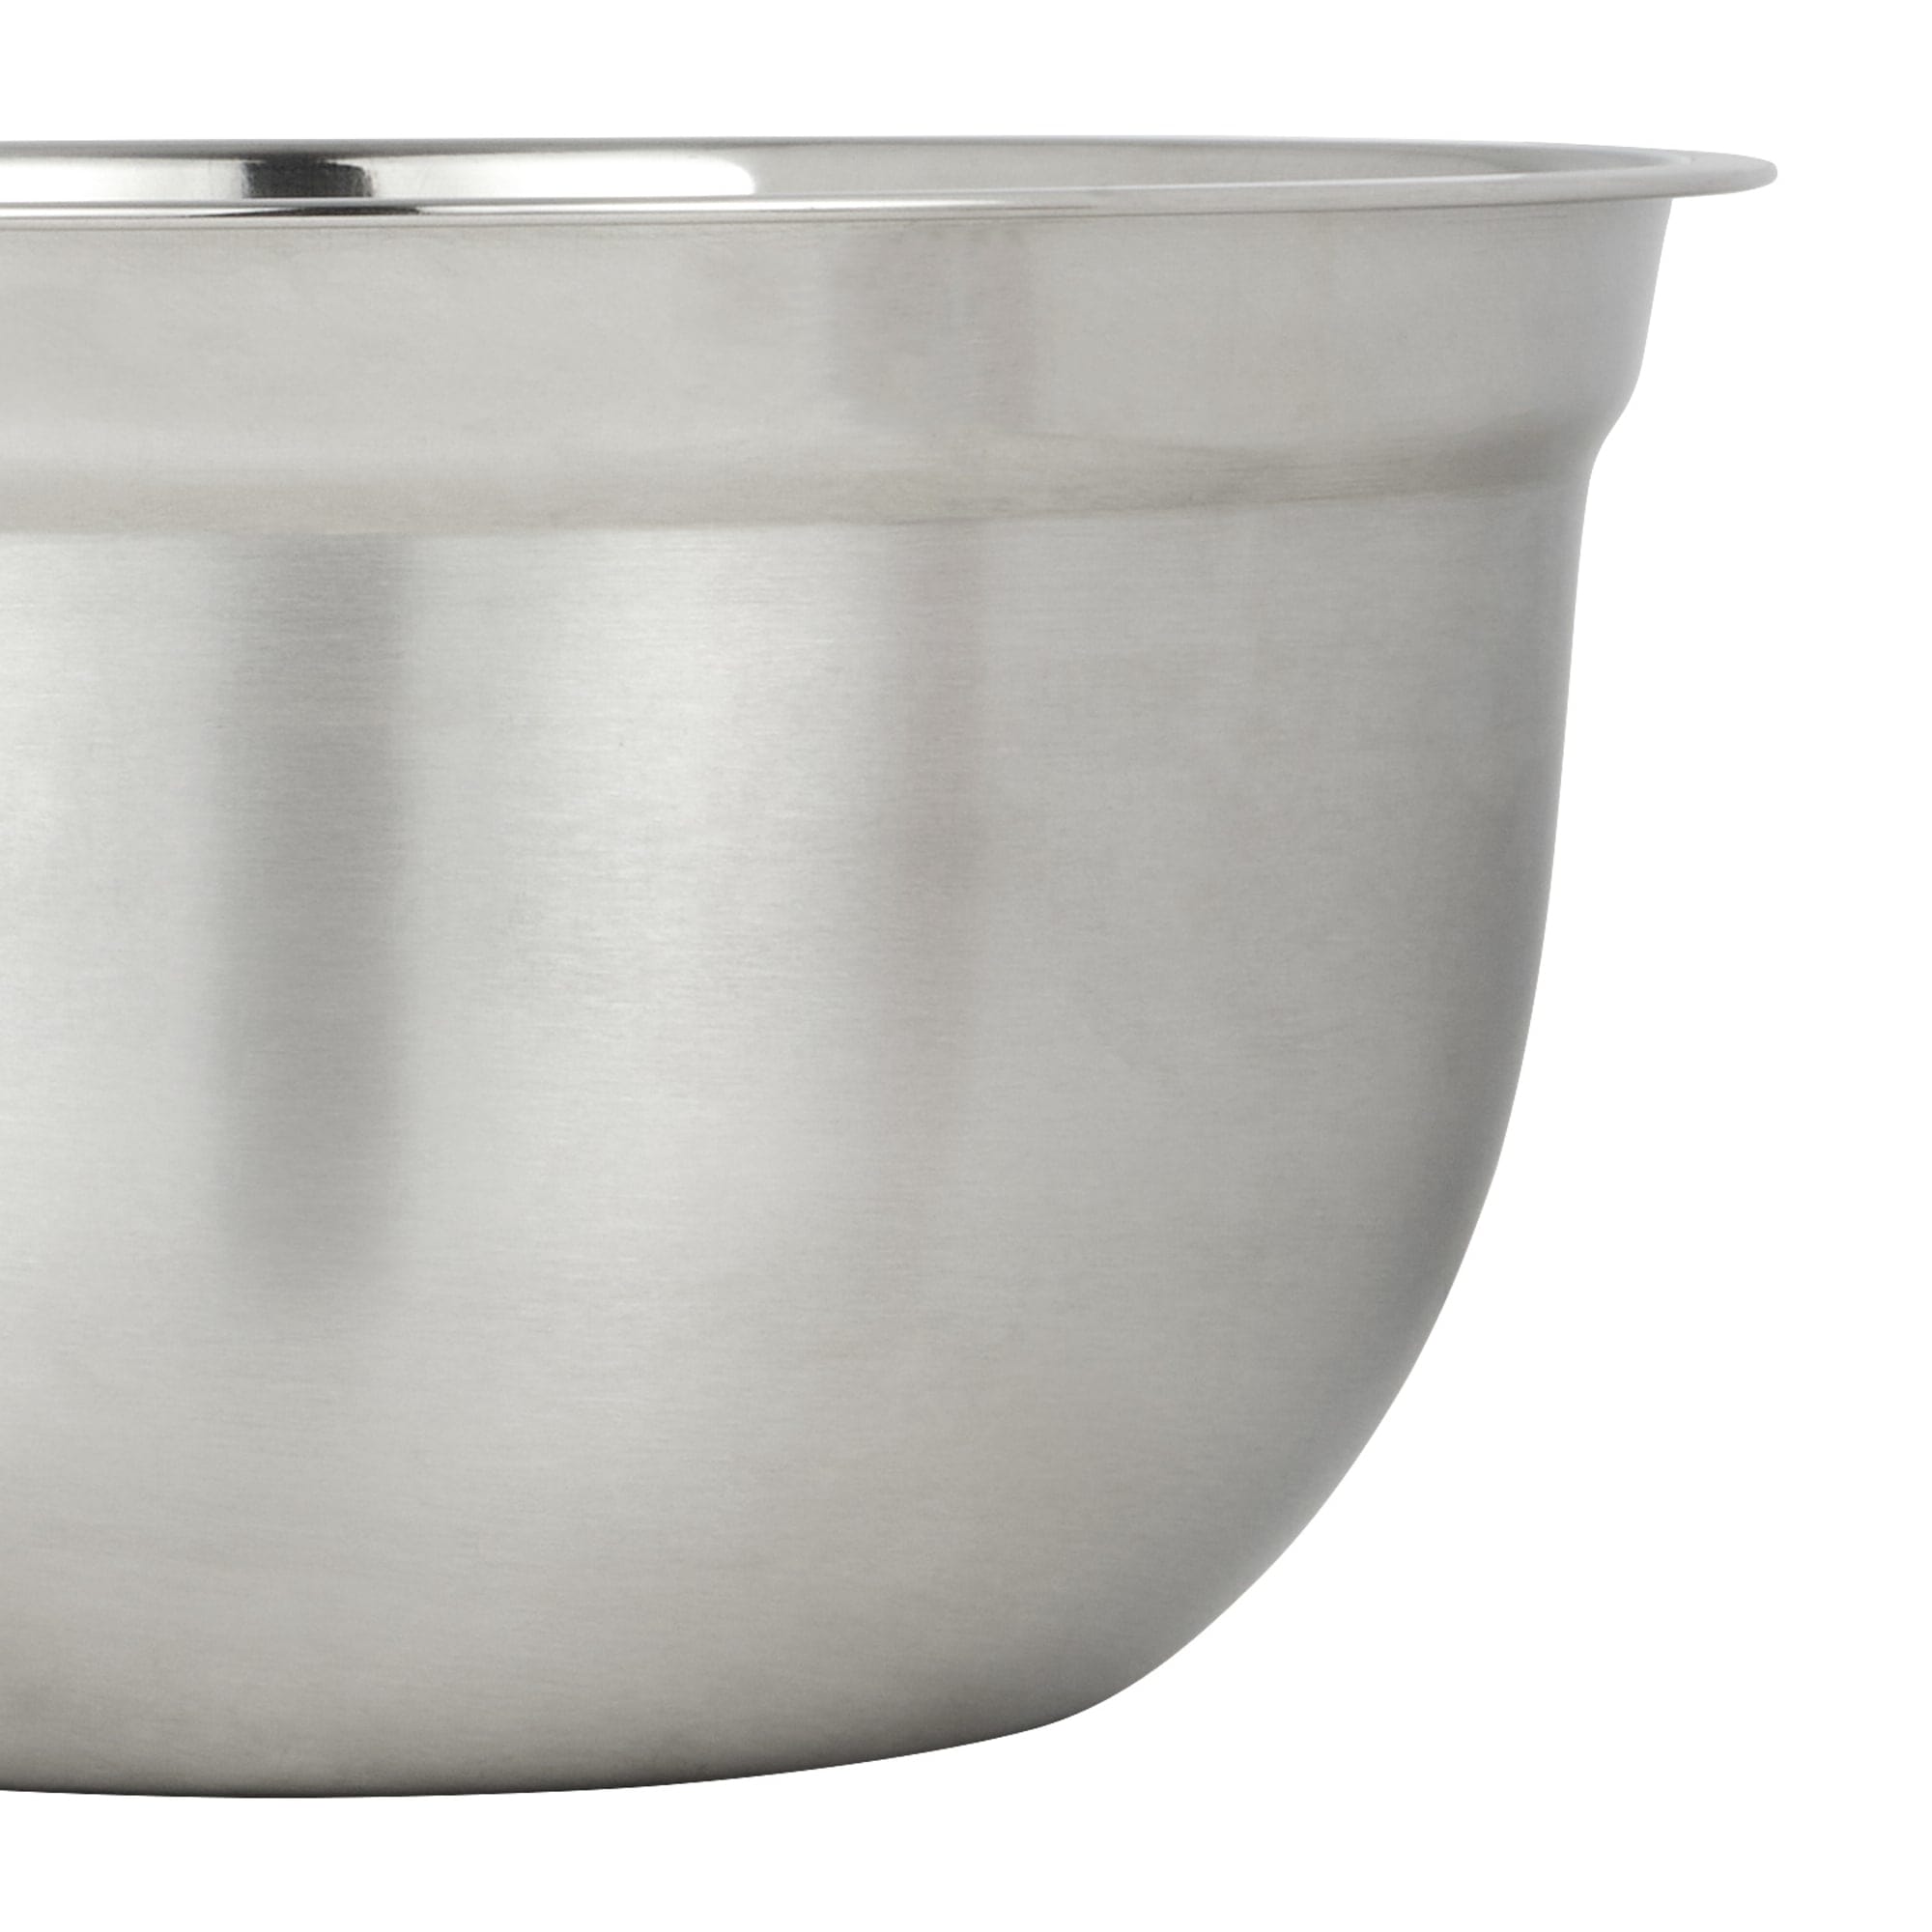 Home Basics Speckled 5 Qt Stainless Steel Mixing Bowl with Non-Skid Bottom, FOOD PREP